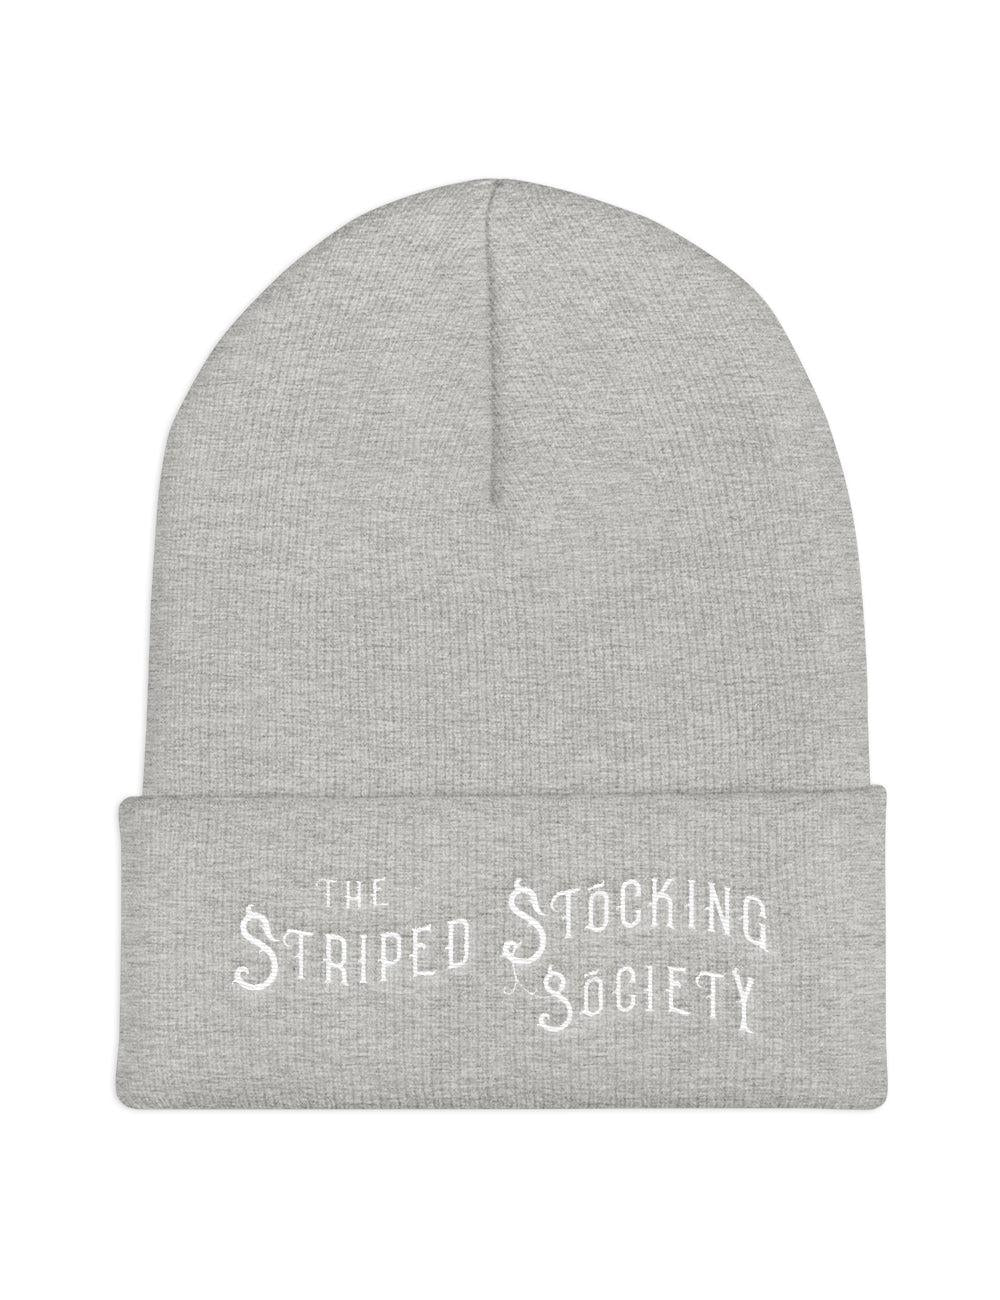 "Striped Stocking Society" Cuffed Embroidered Knit Beanie